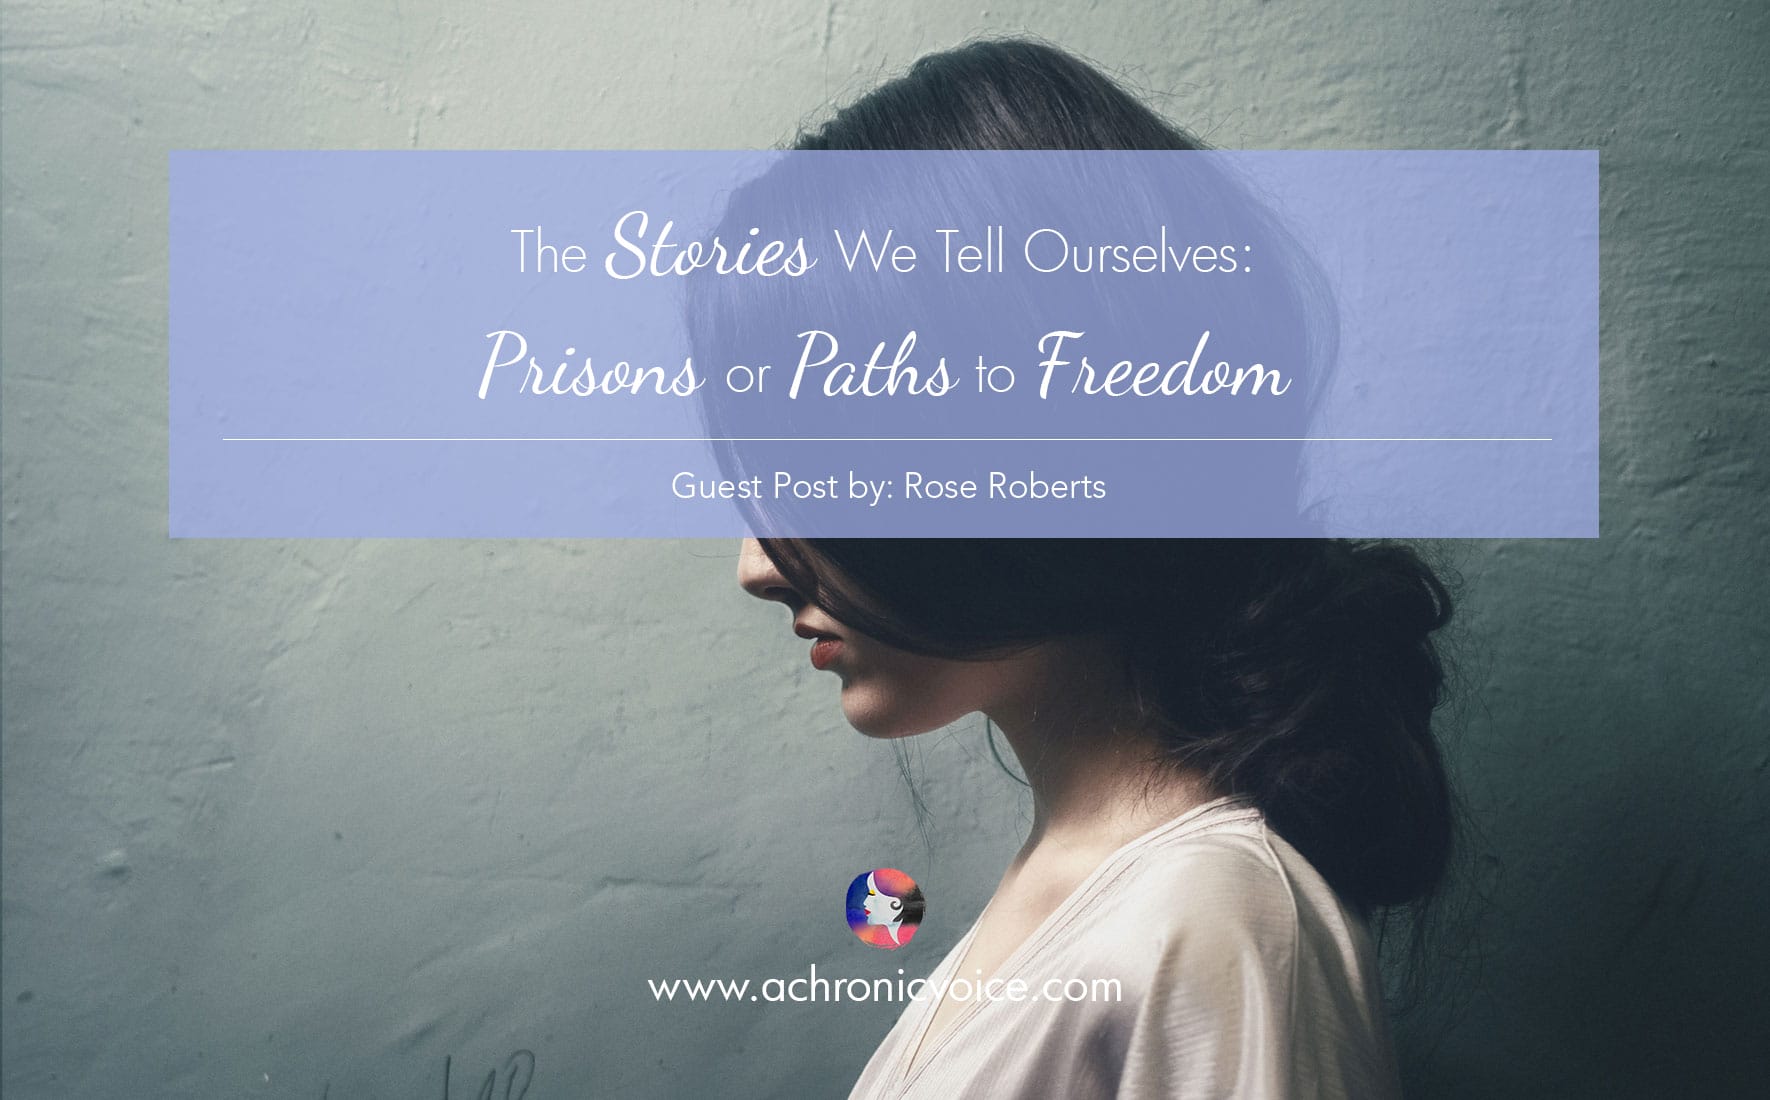 The Stories We Tell Ourselves: Prisons or Paths to Freedom